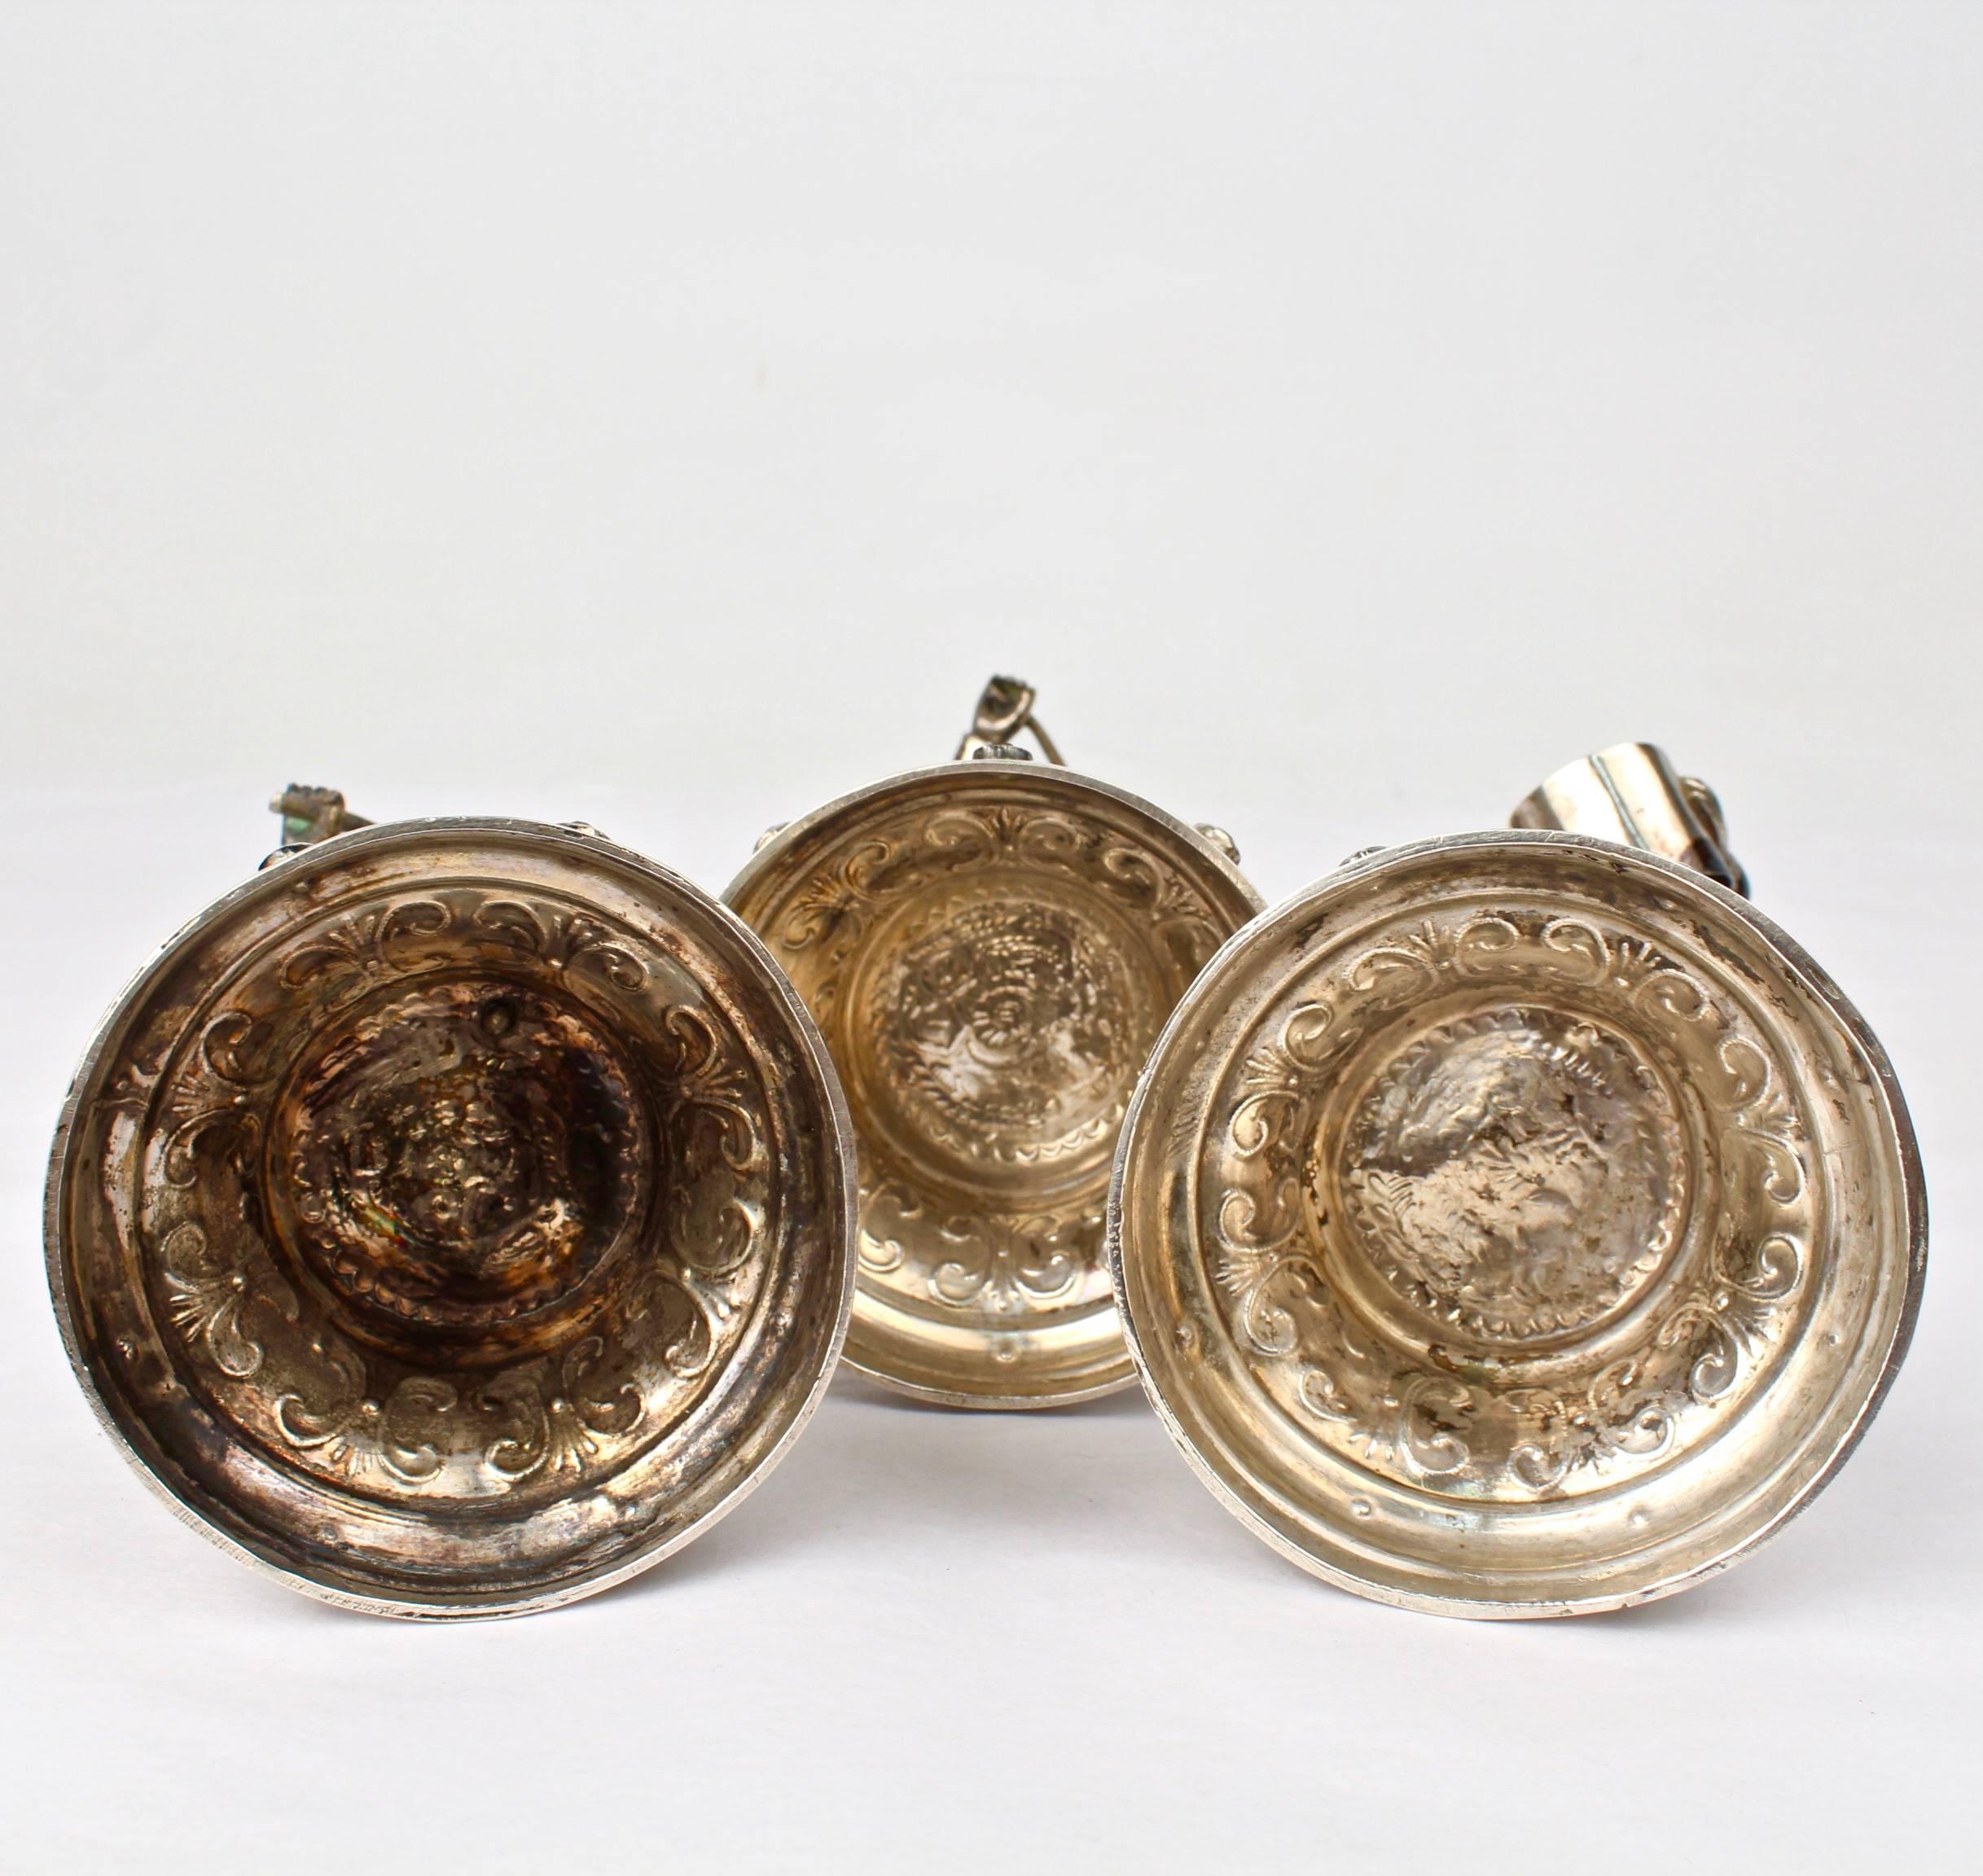 Three 19th Century Jeweled & Enameled German Coin Silver Musician Figurines For Sale 5